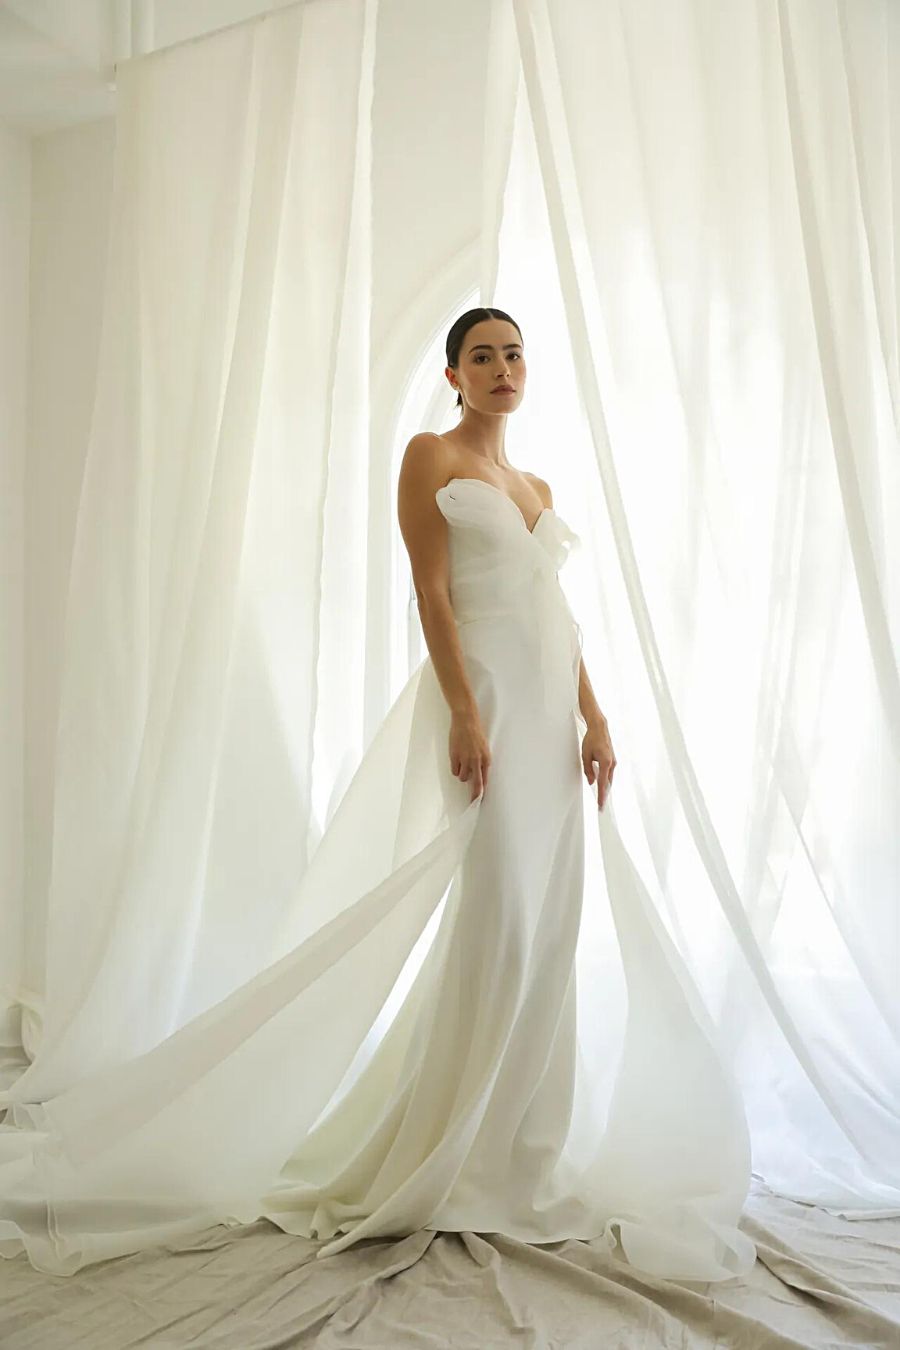 Bride standing in minimal fitted wedding dress with structured organza top and overskirt